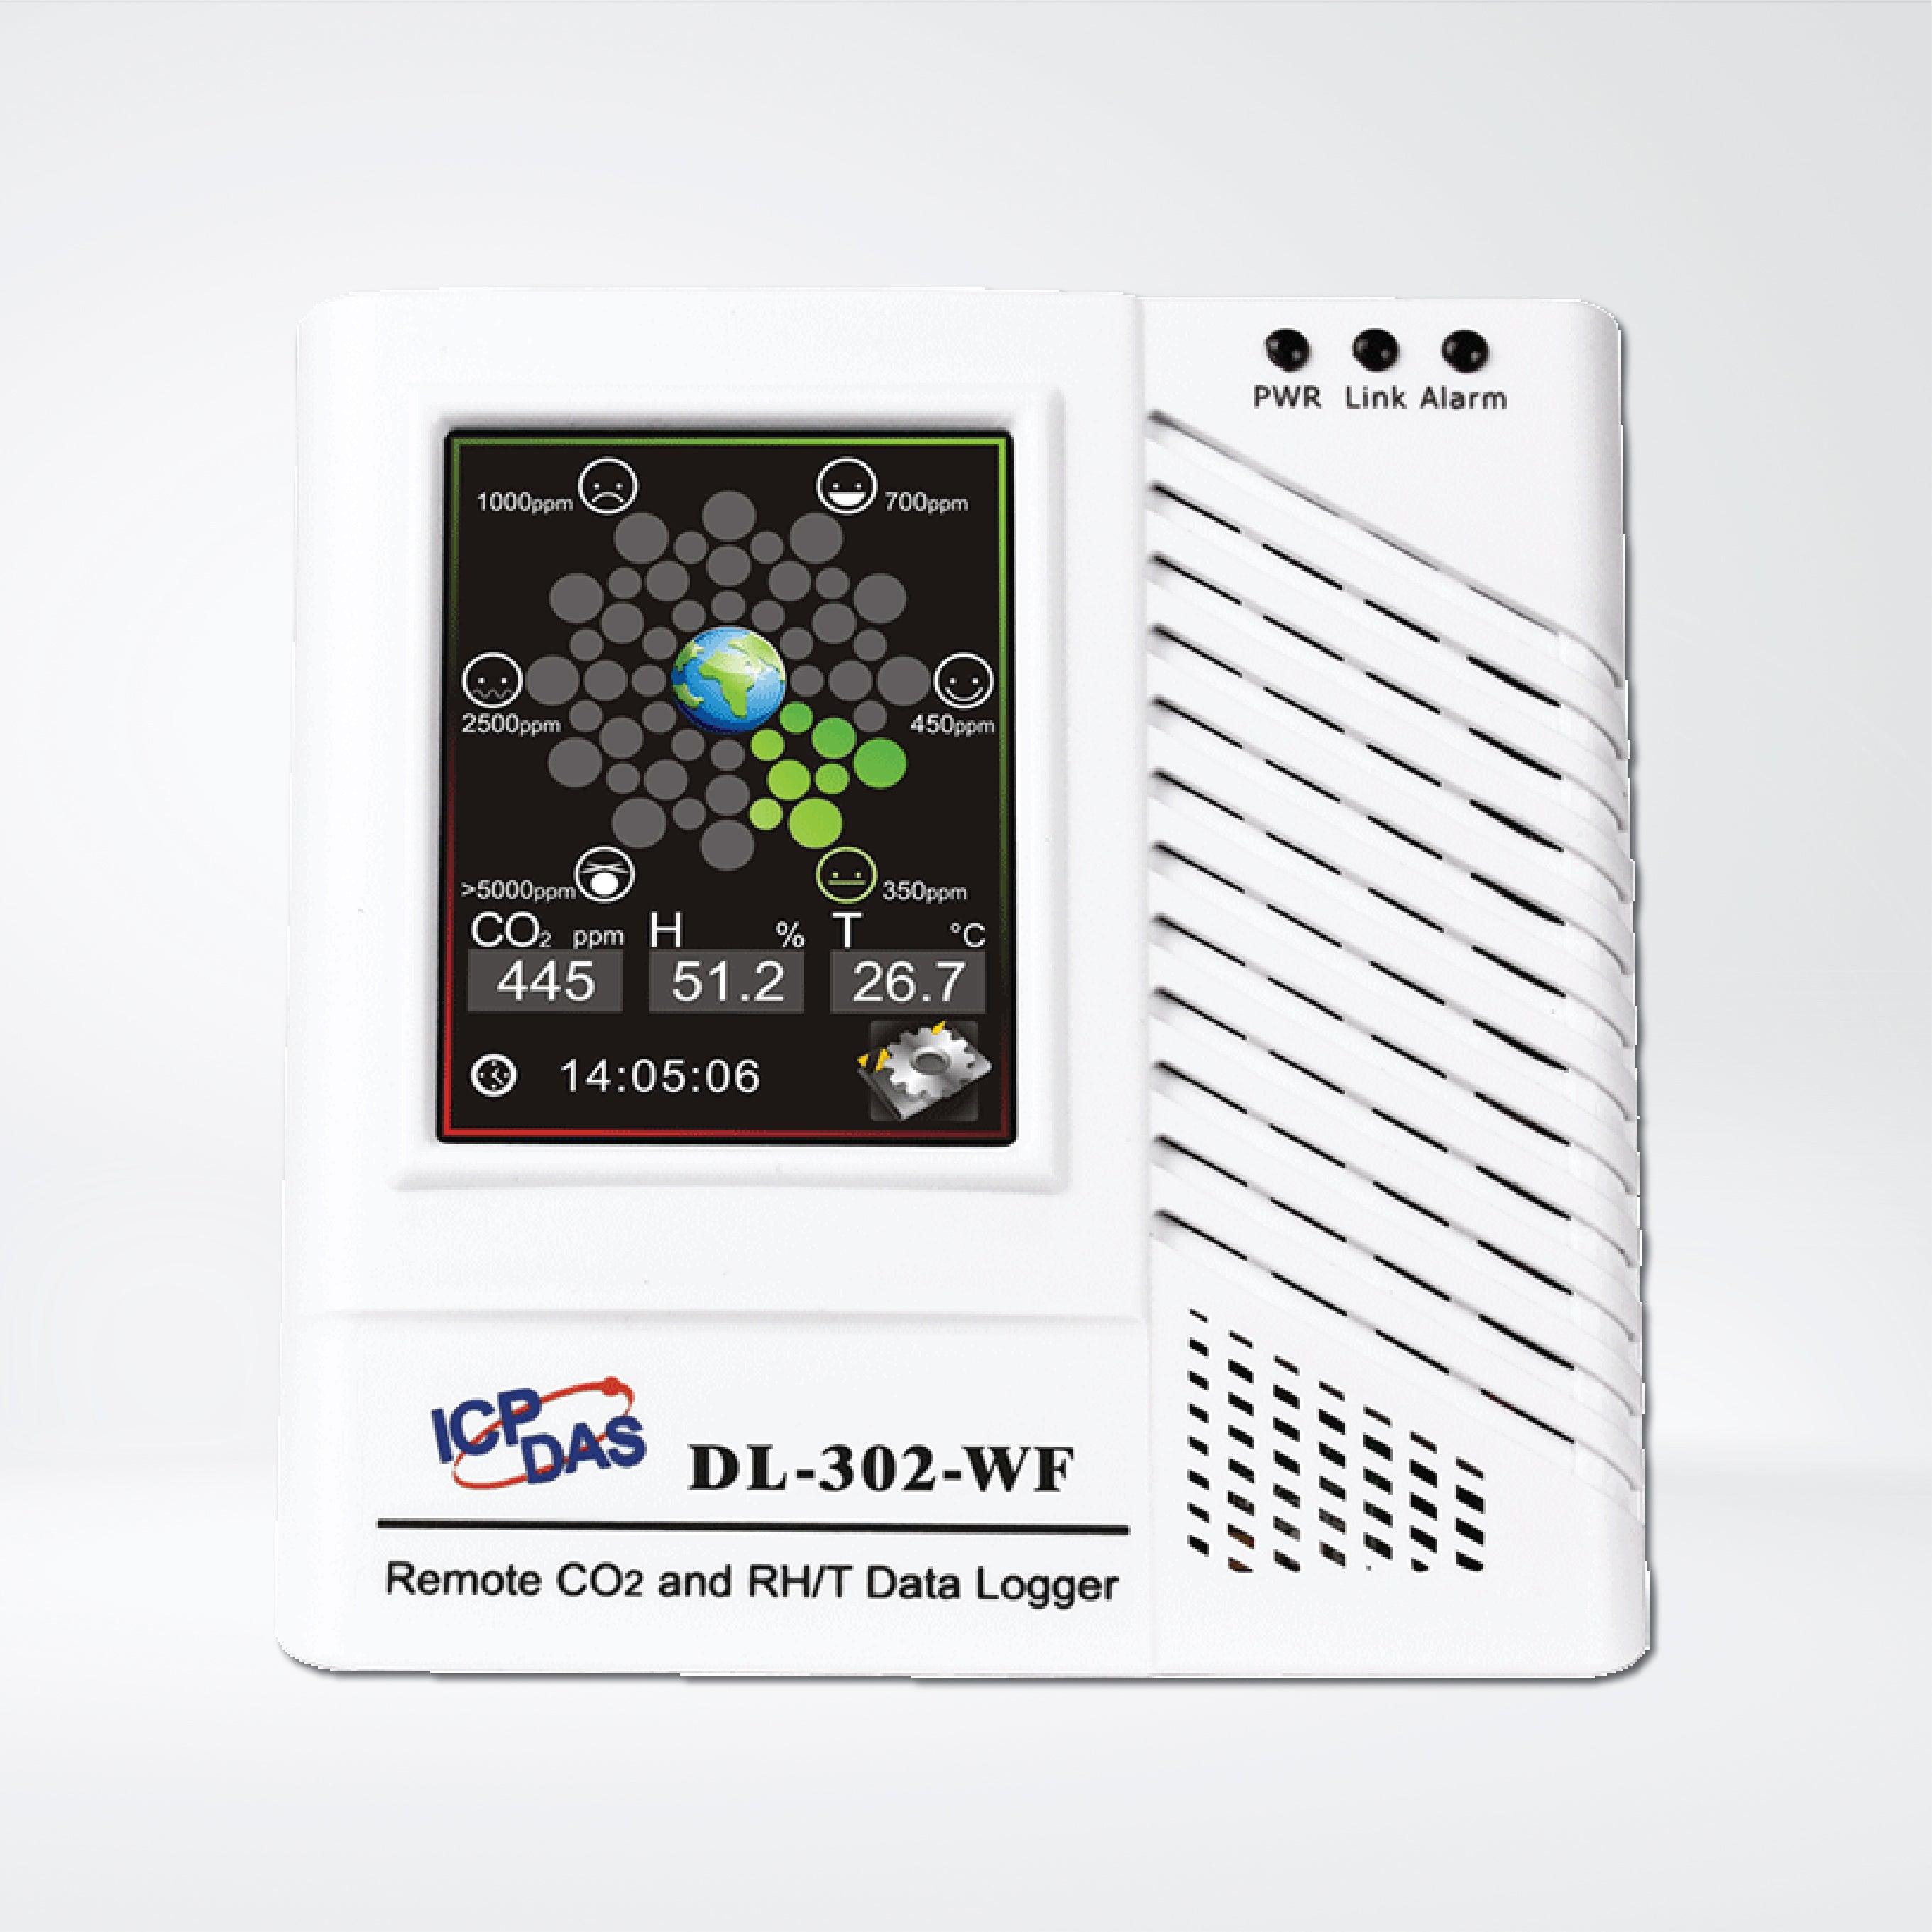 DL-302-WF Remote CO2/Temperature/Humidity/Dew Point Data Logger - Riverplus